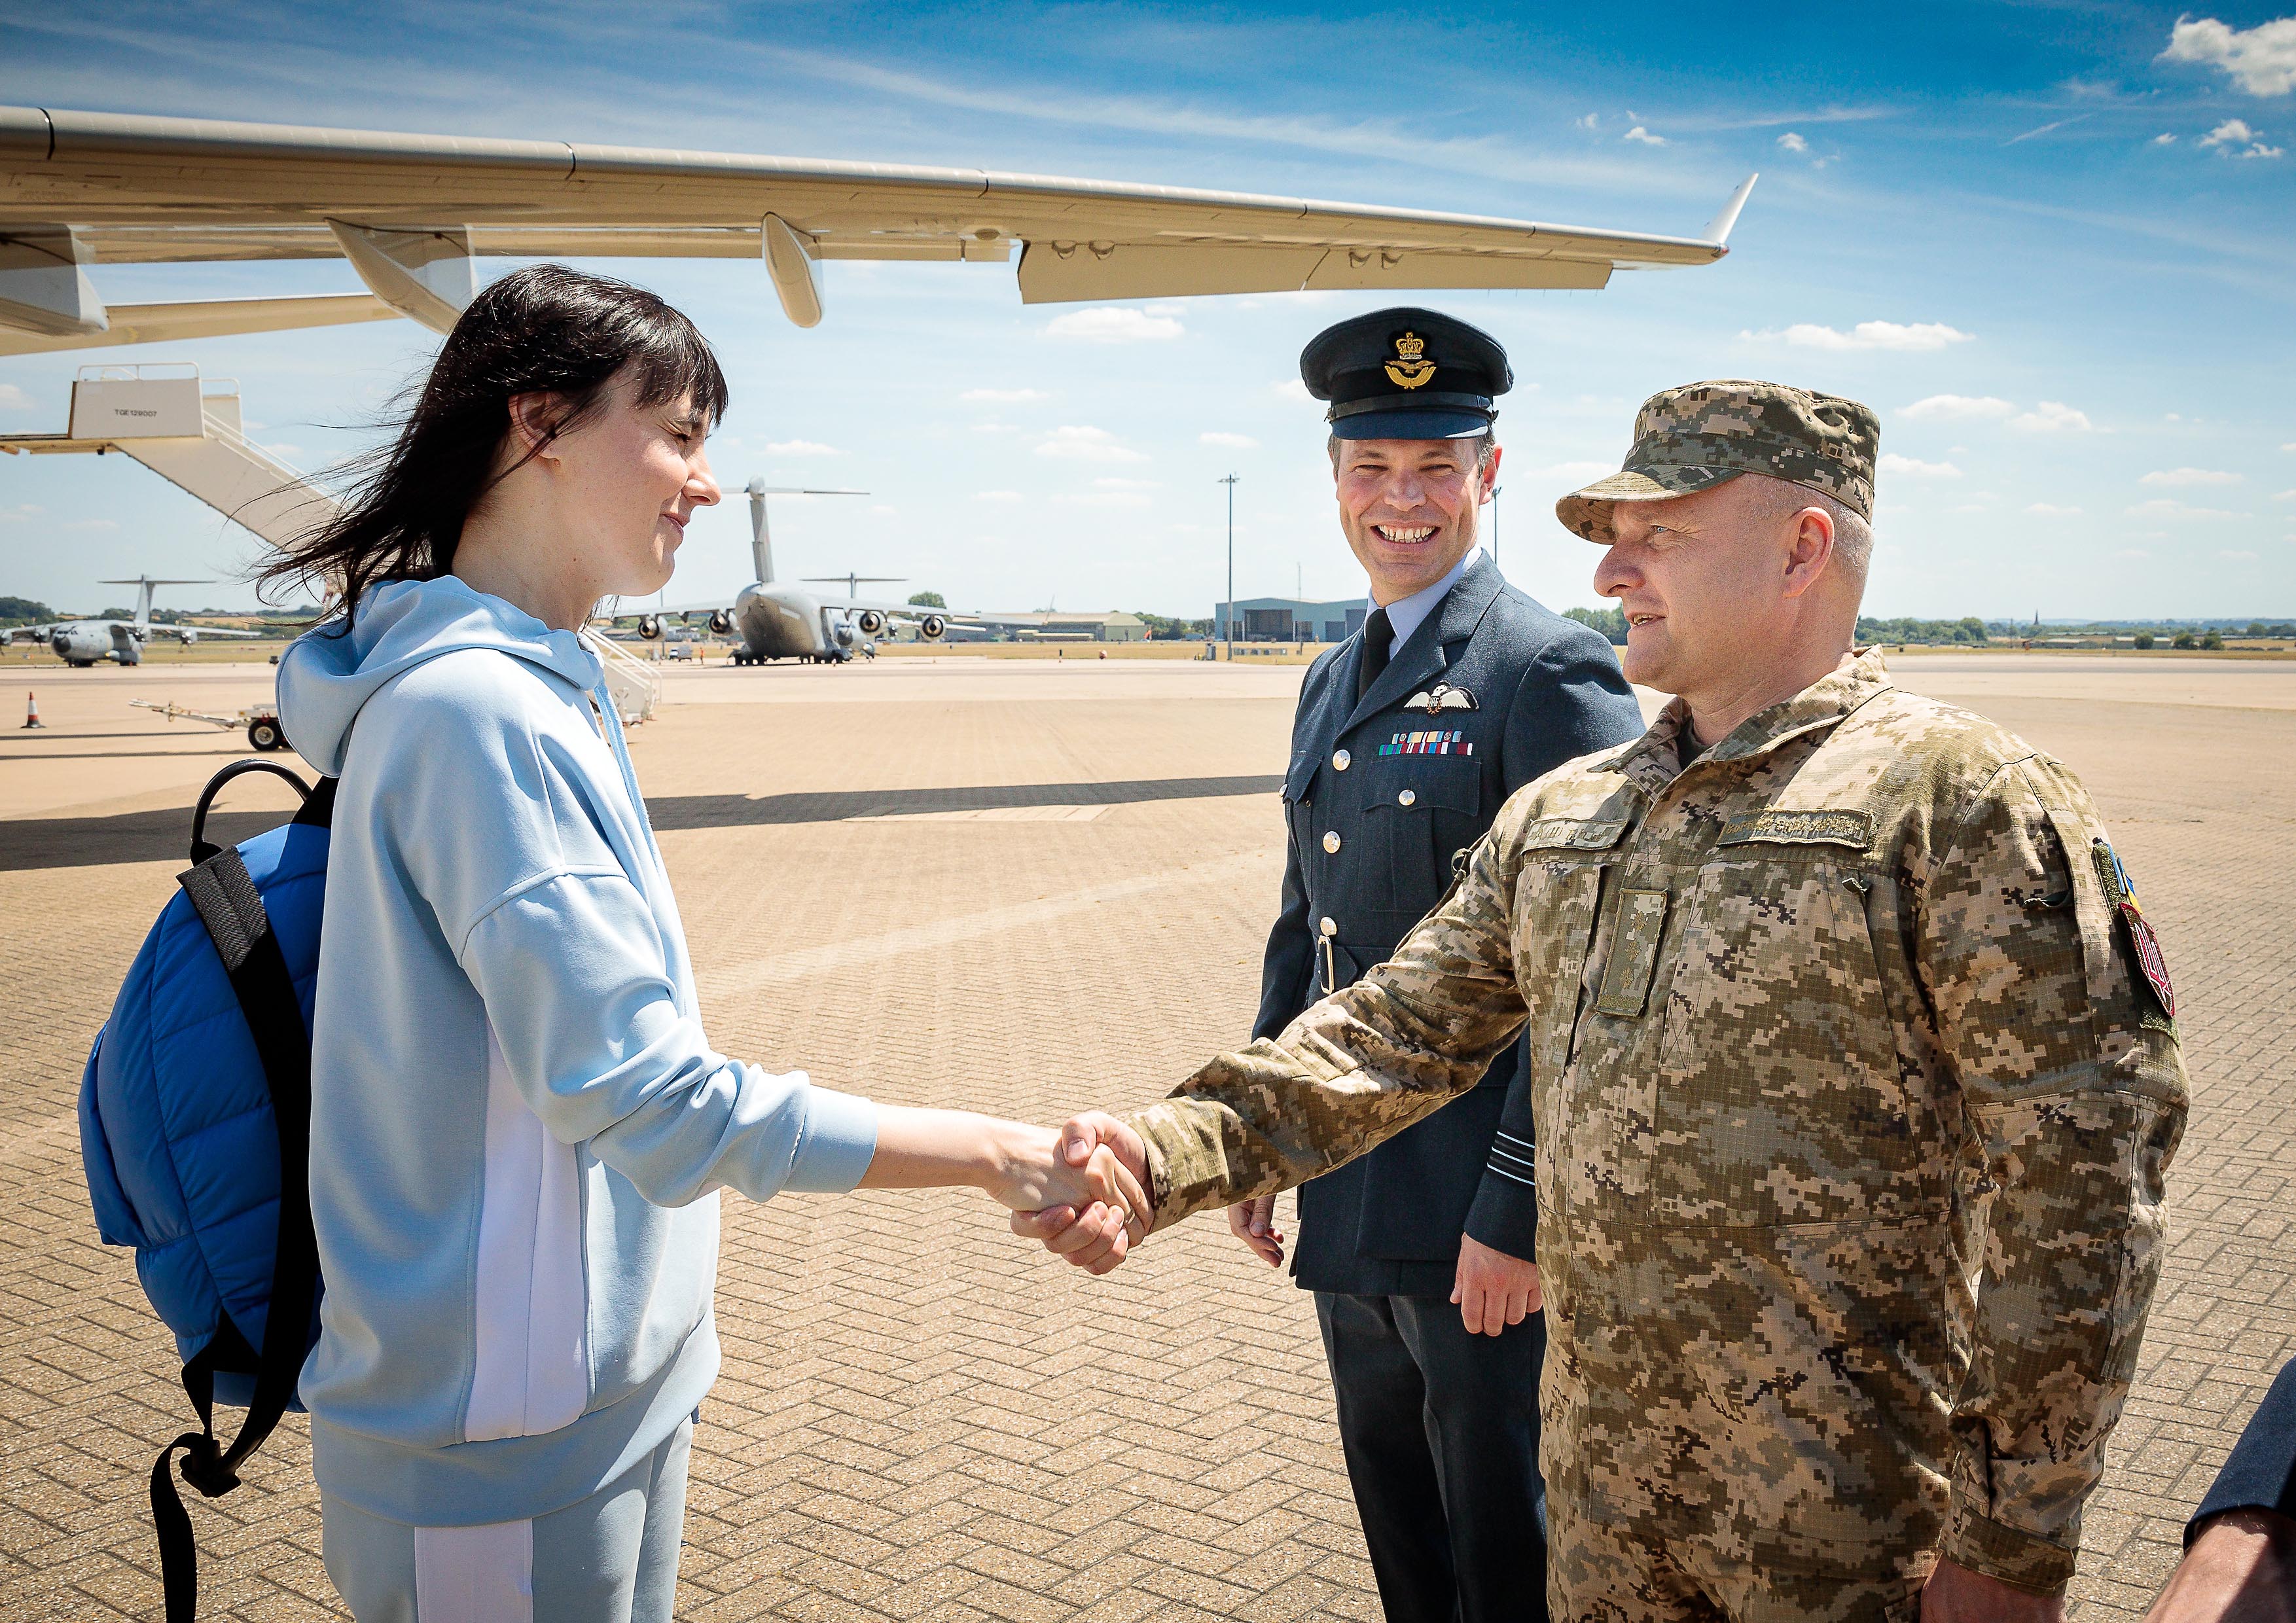 Image shows aviators shaking hands on the airfield.